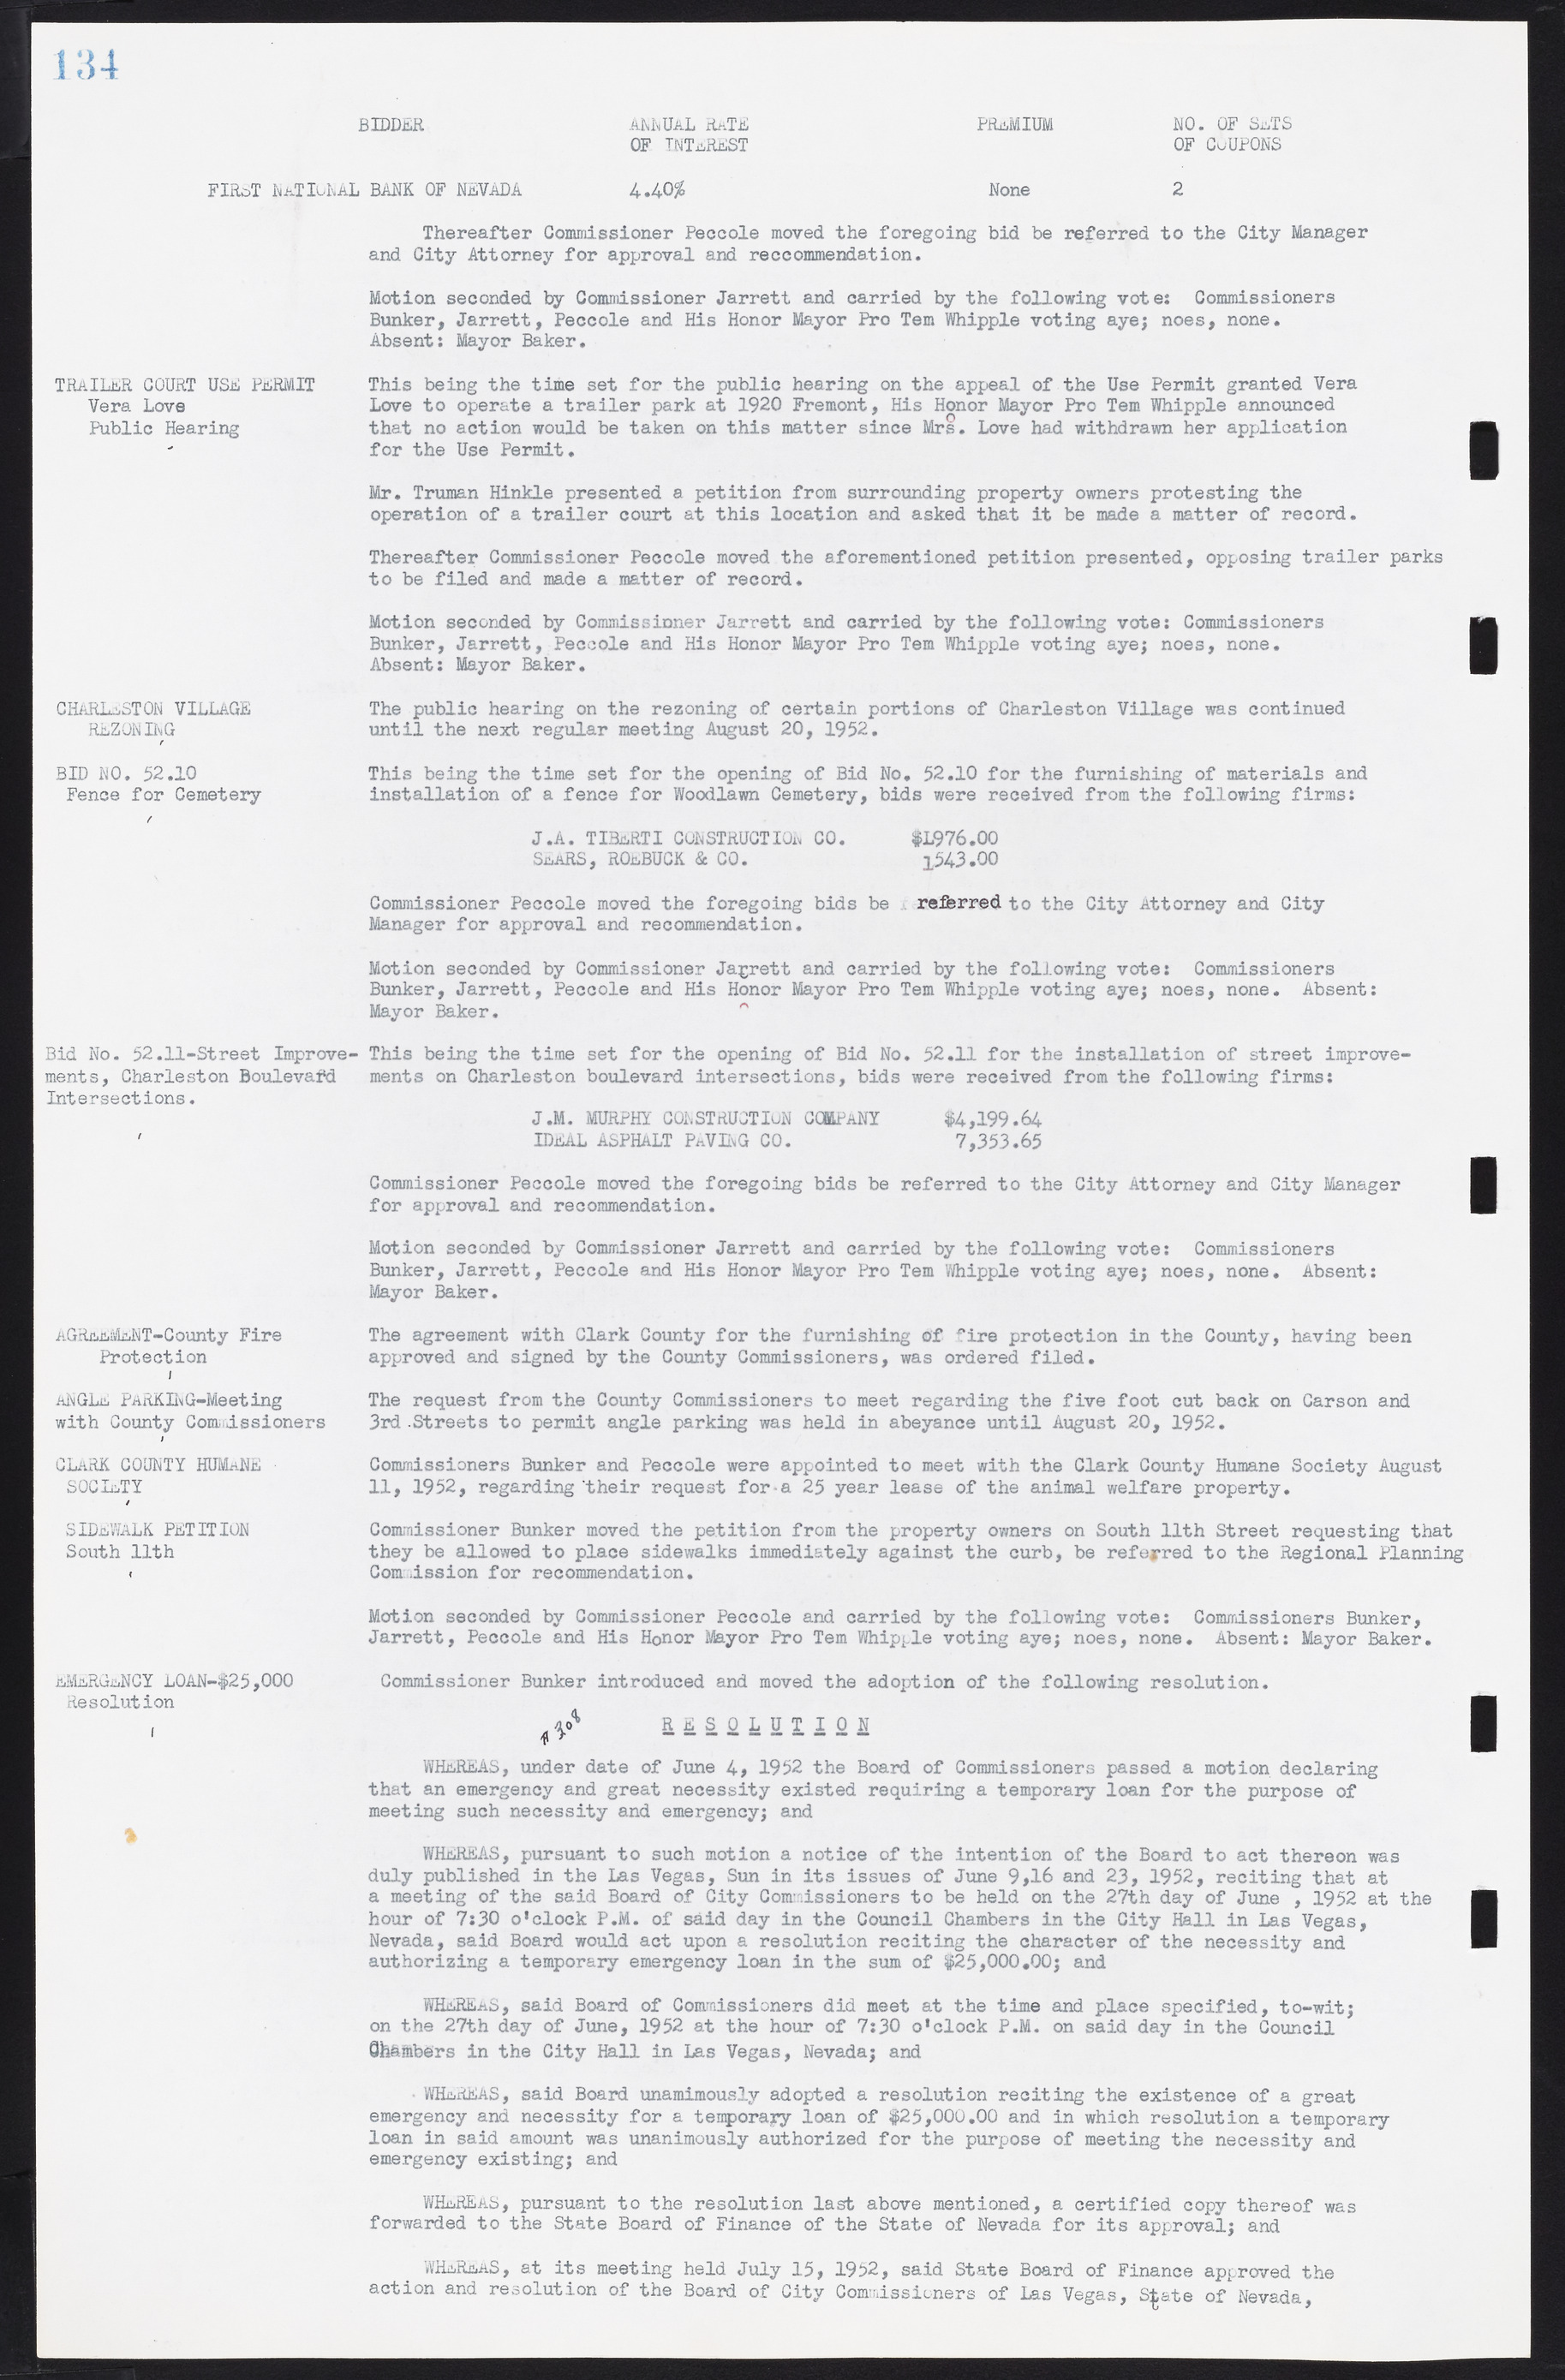 Las Vegas City Commission Minutes, May 26, 1952 to February 17, 1954, lvc000008-140